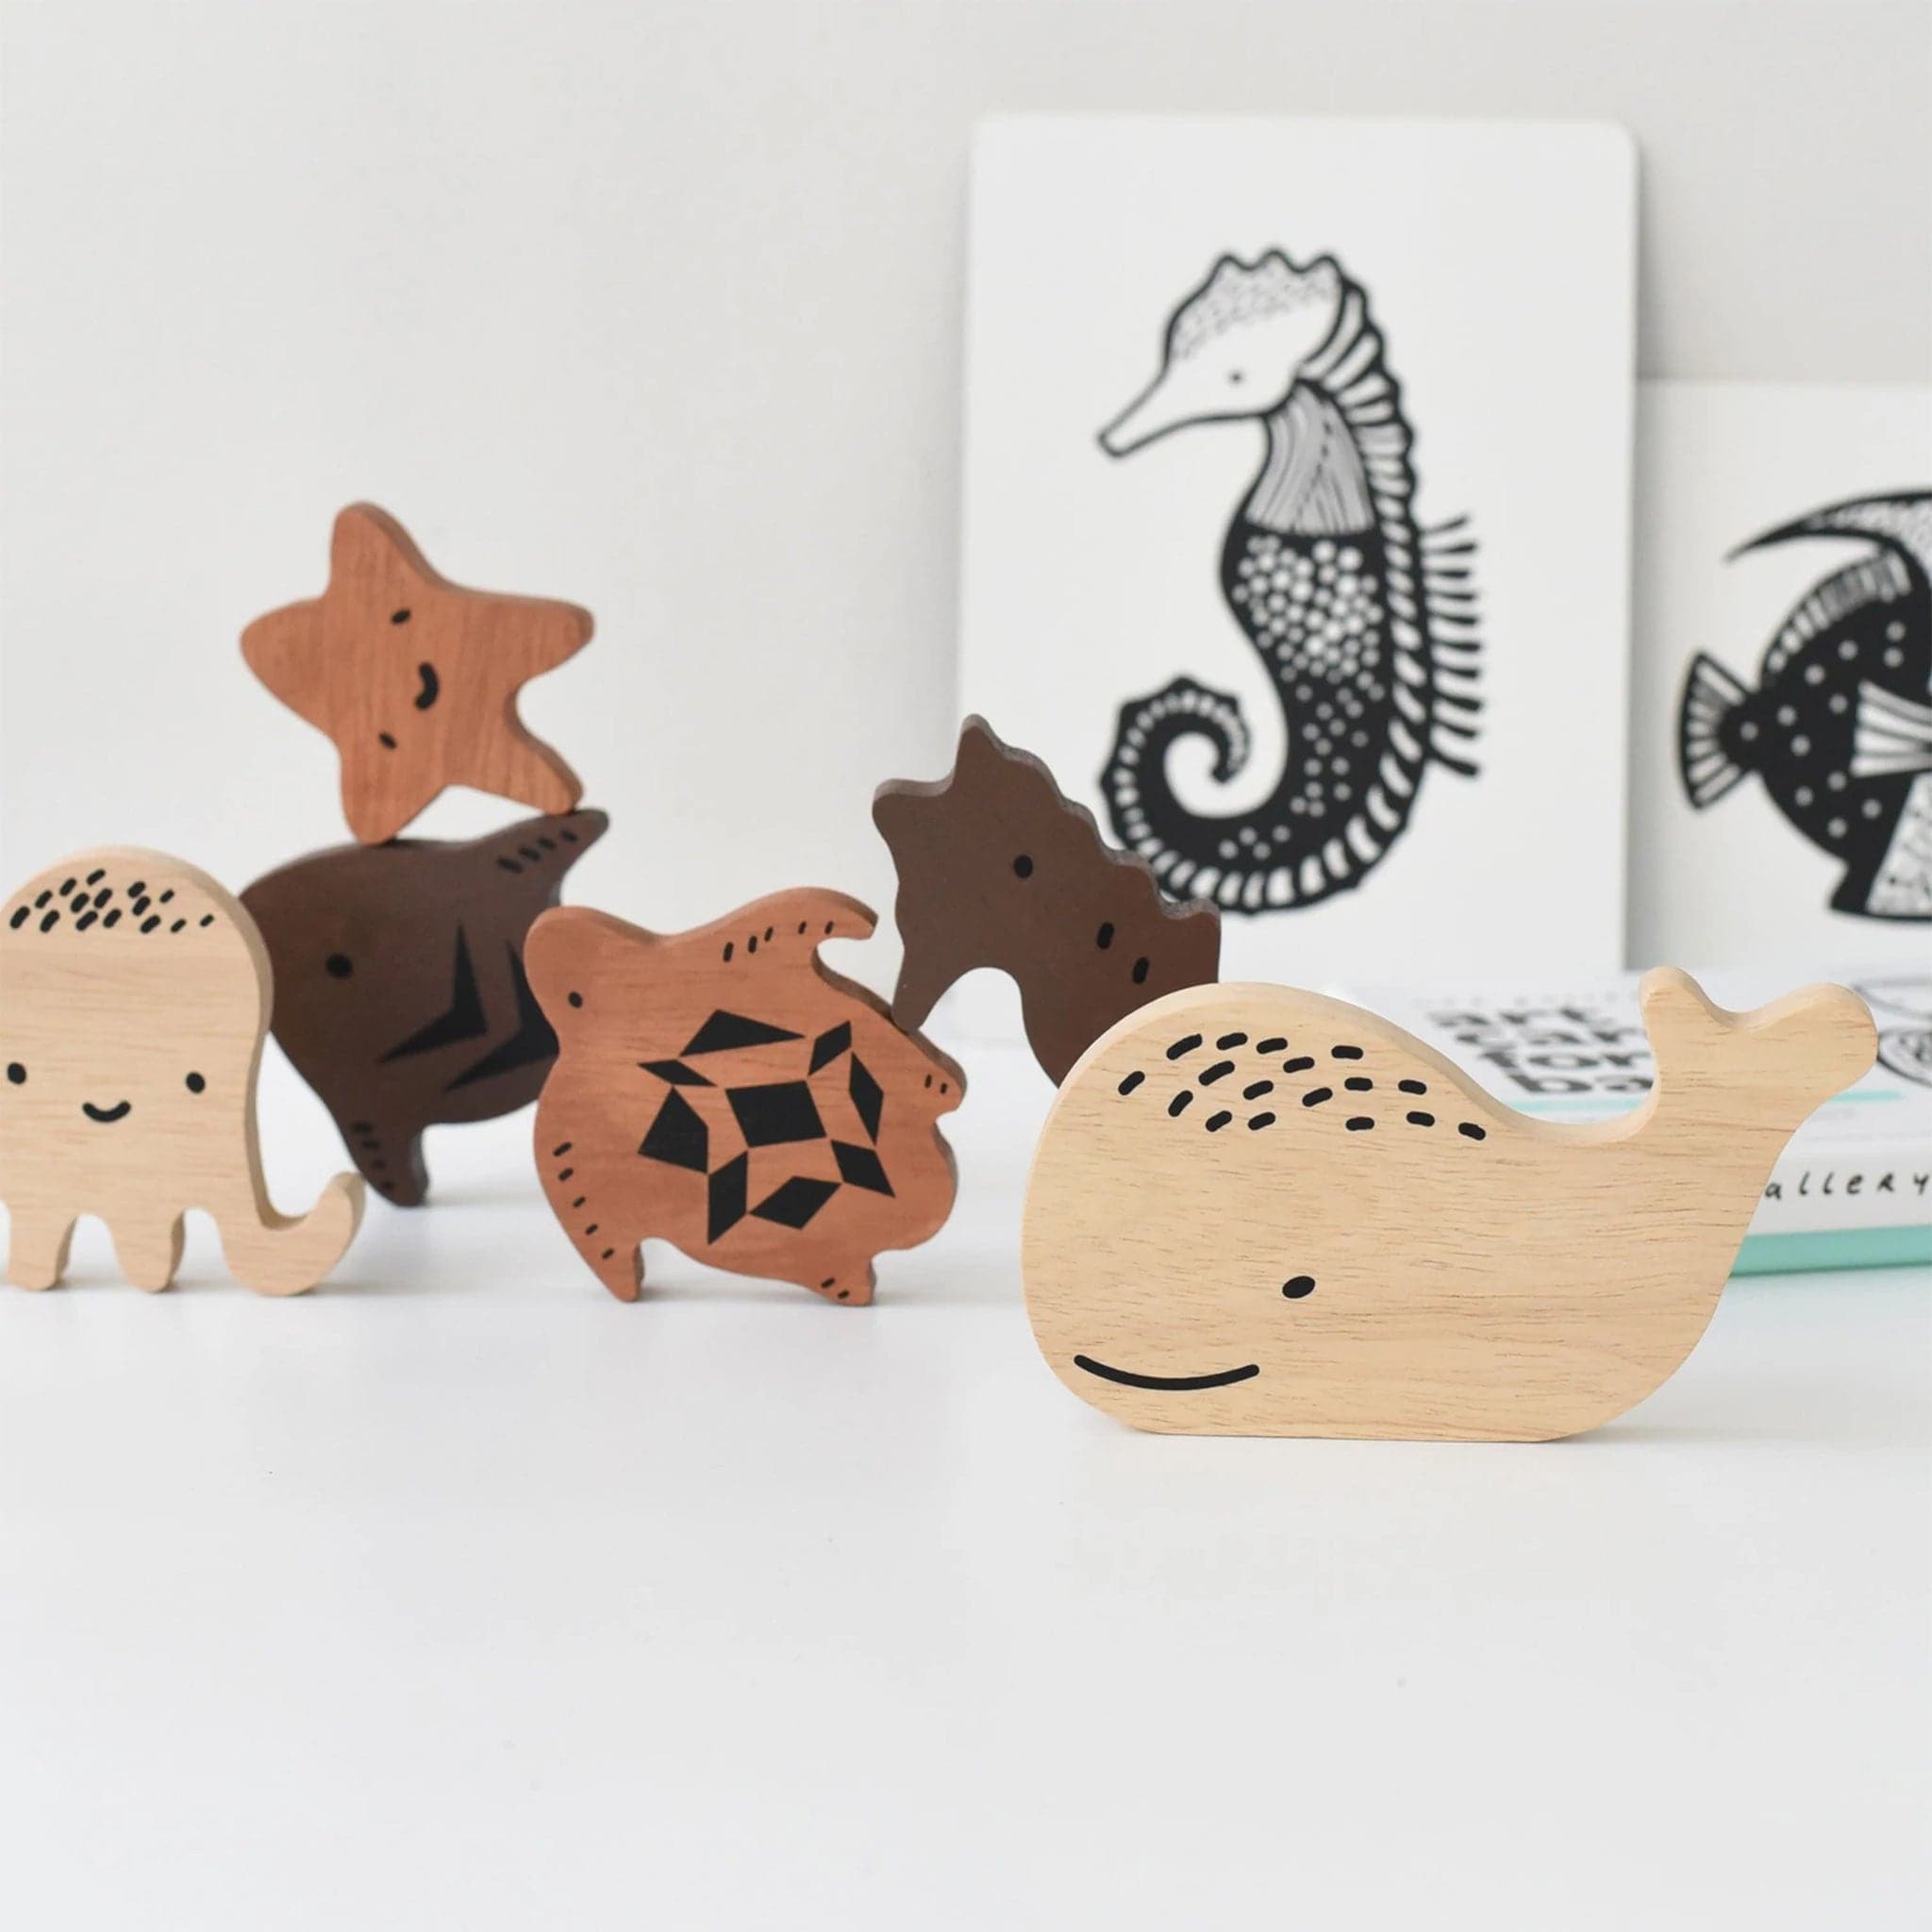 Sweet sea creatures scattered around their puzzle board. There is a starfish, octopus, sea horse, turtle, fish, and whale. Each puzzle piece is wooden and a different color wood.